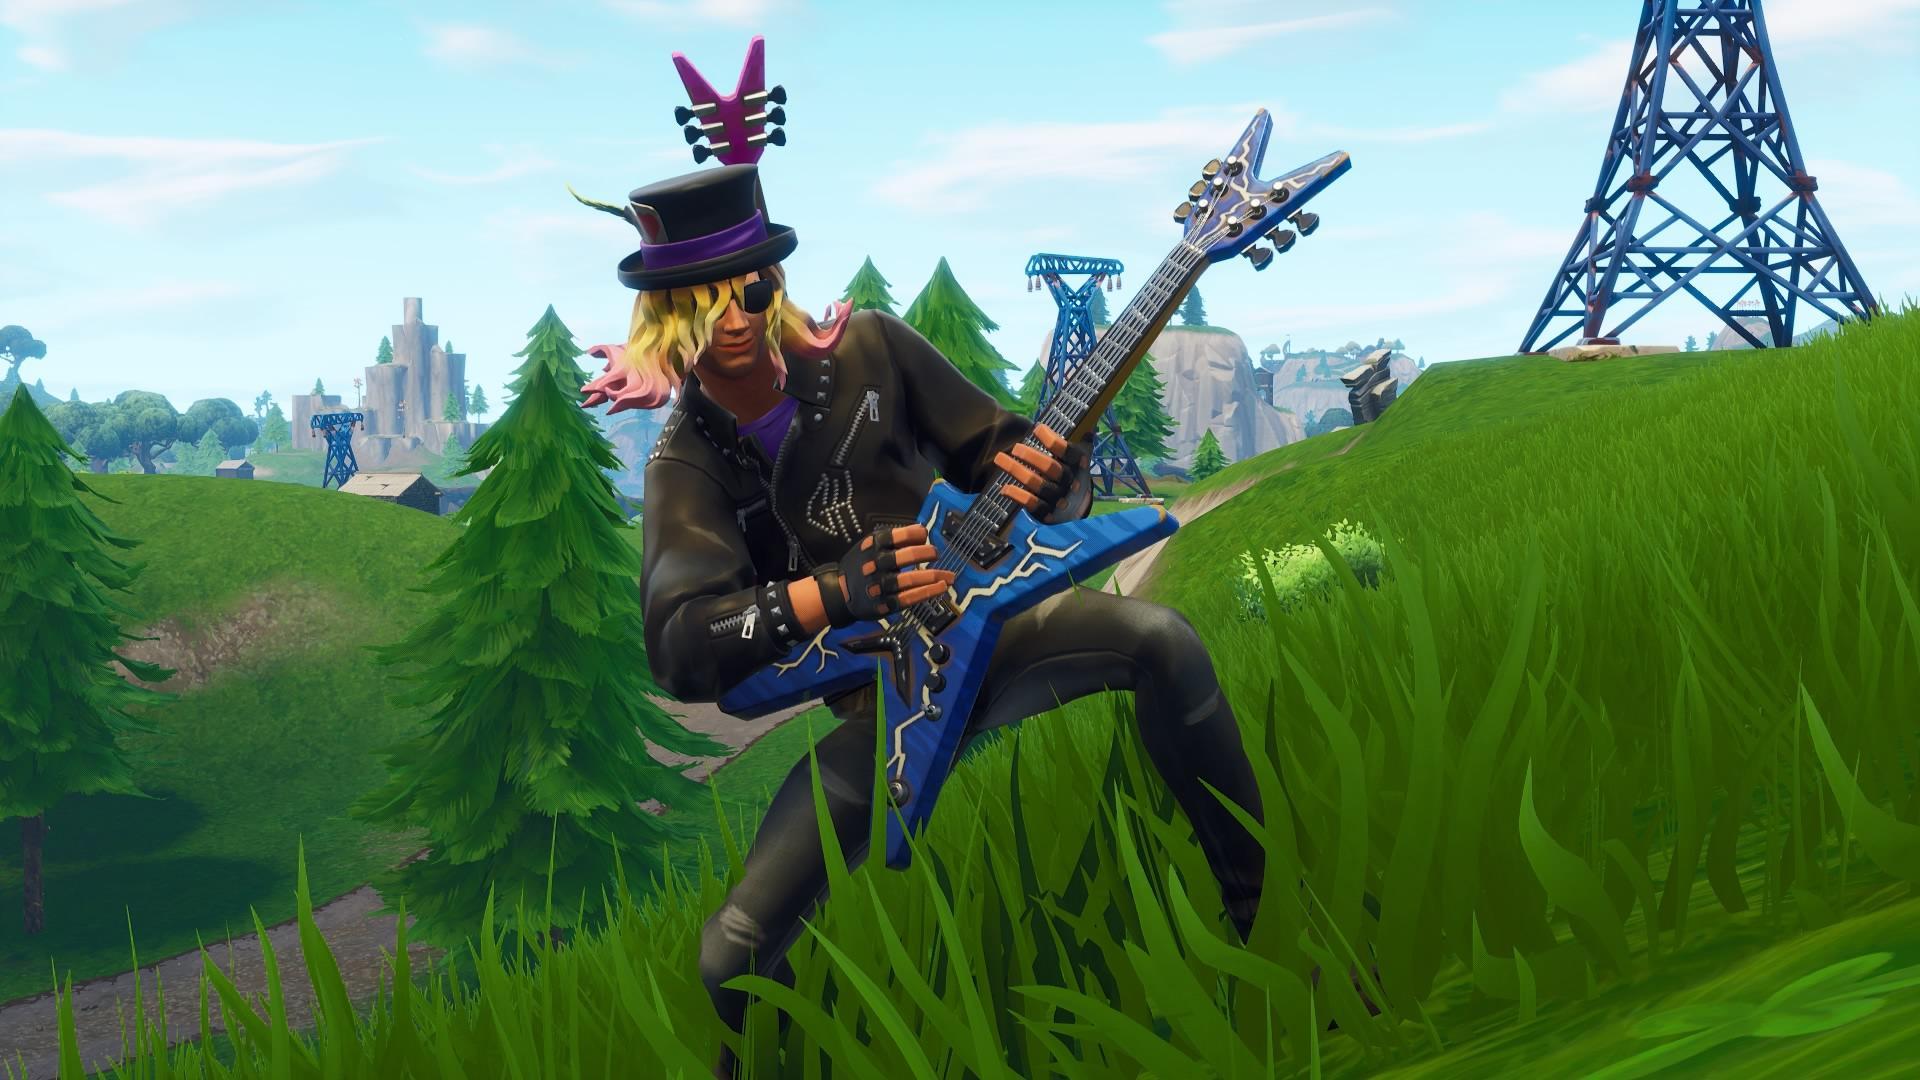 Stage slayer is one of the coolest skins they've added in a while